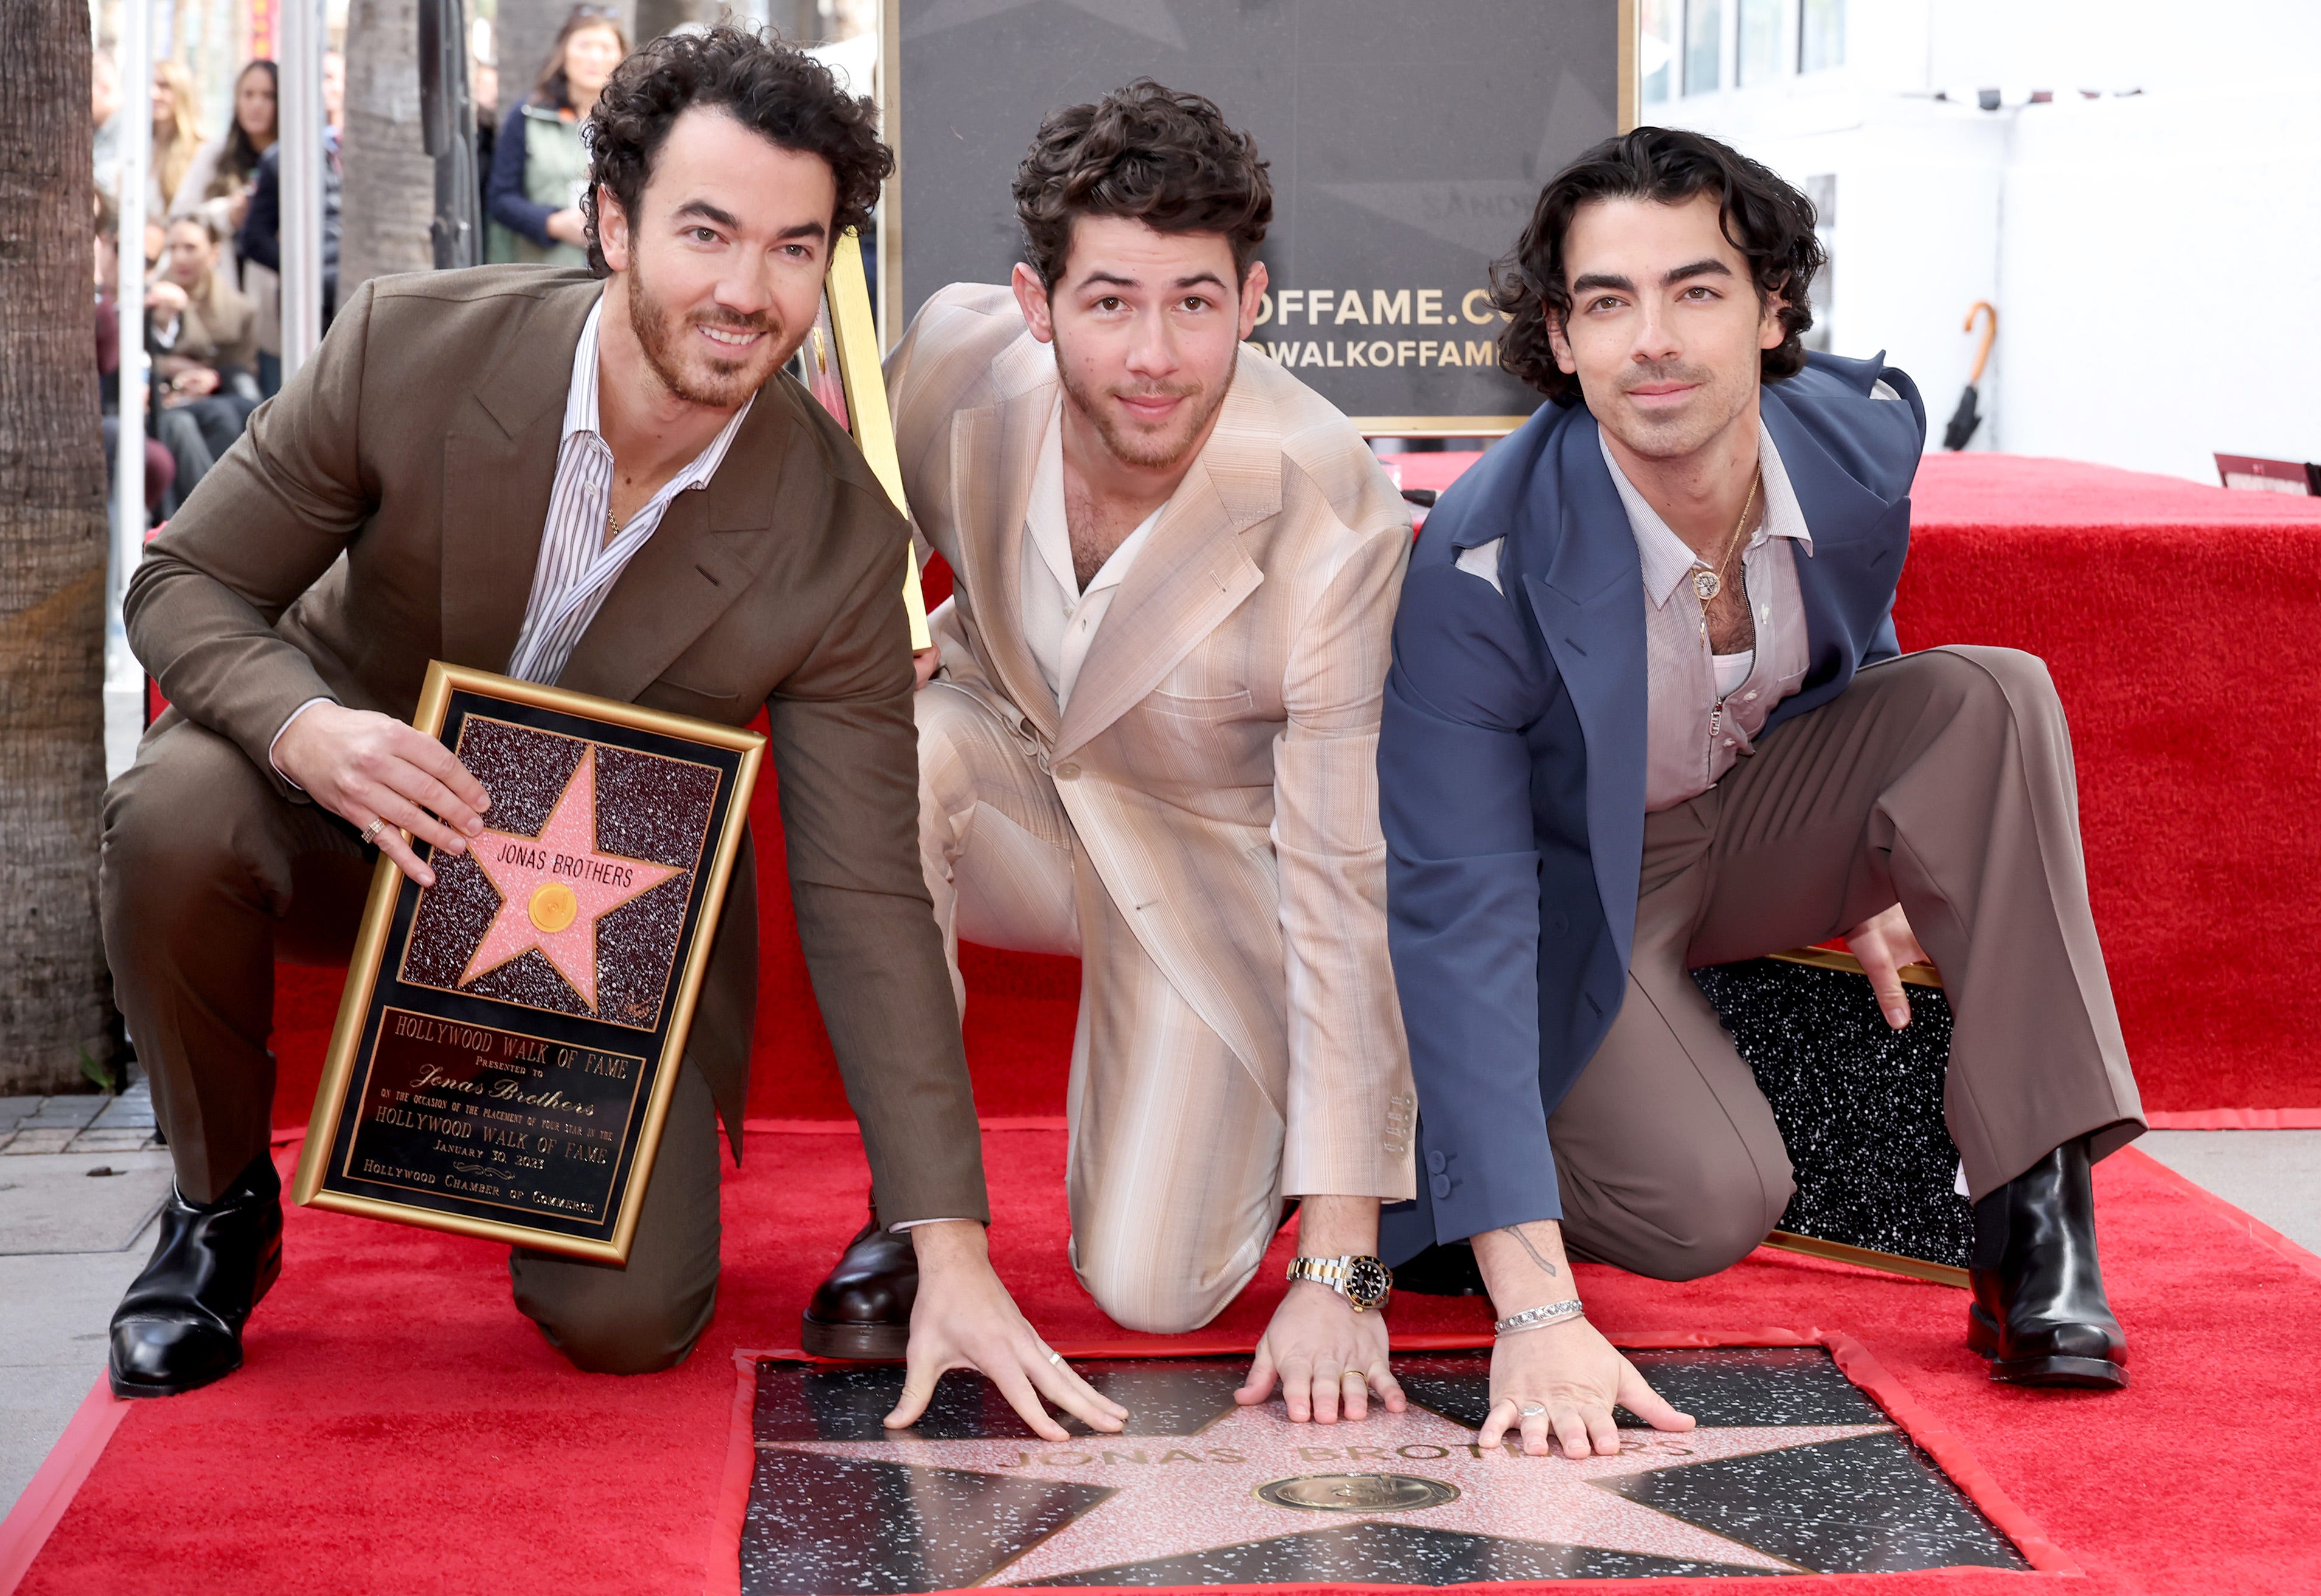 The Jonas Brothers’ cultural impact was cemented on the Hollywood Walk of Fame on Jan. 30, 2023. Their family, friends and past collaborators — not to mention a massive crowd of fans — were there to celebrate the accomplishment 18 years after the band was formed.